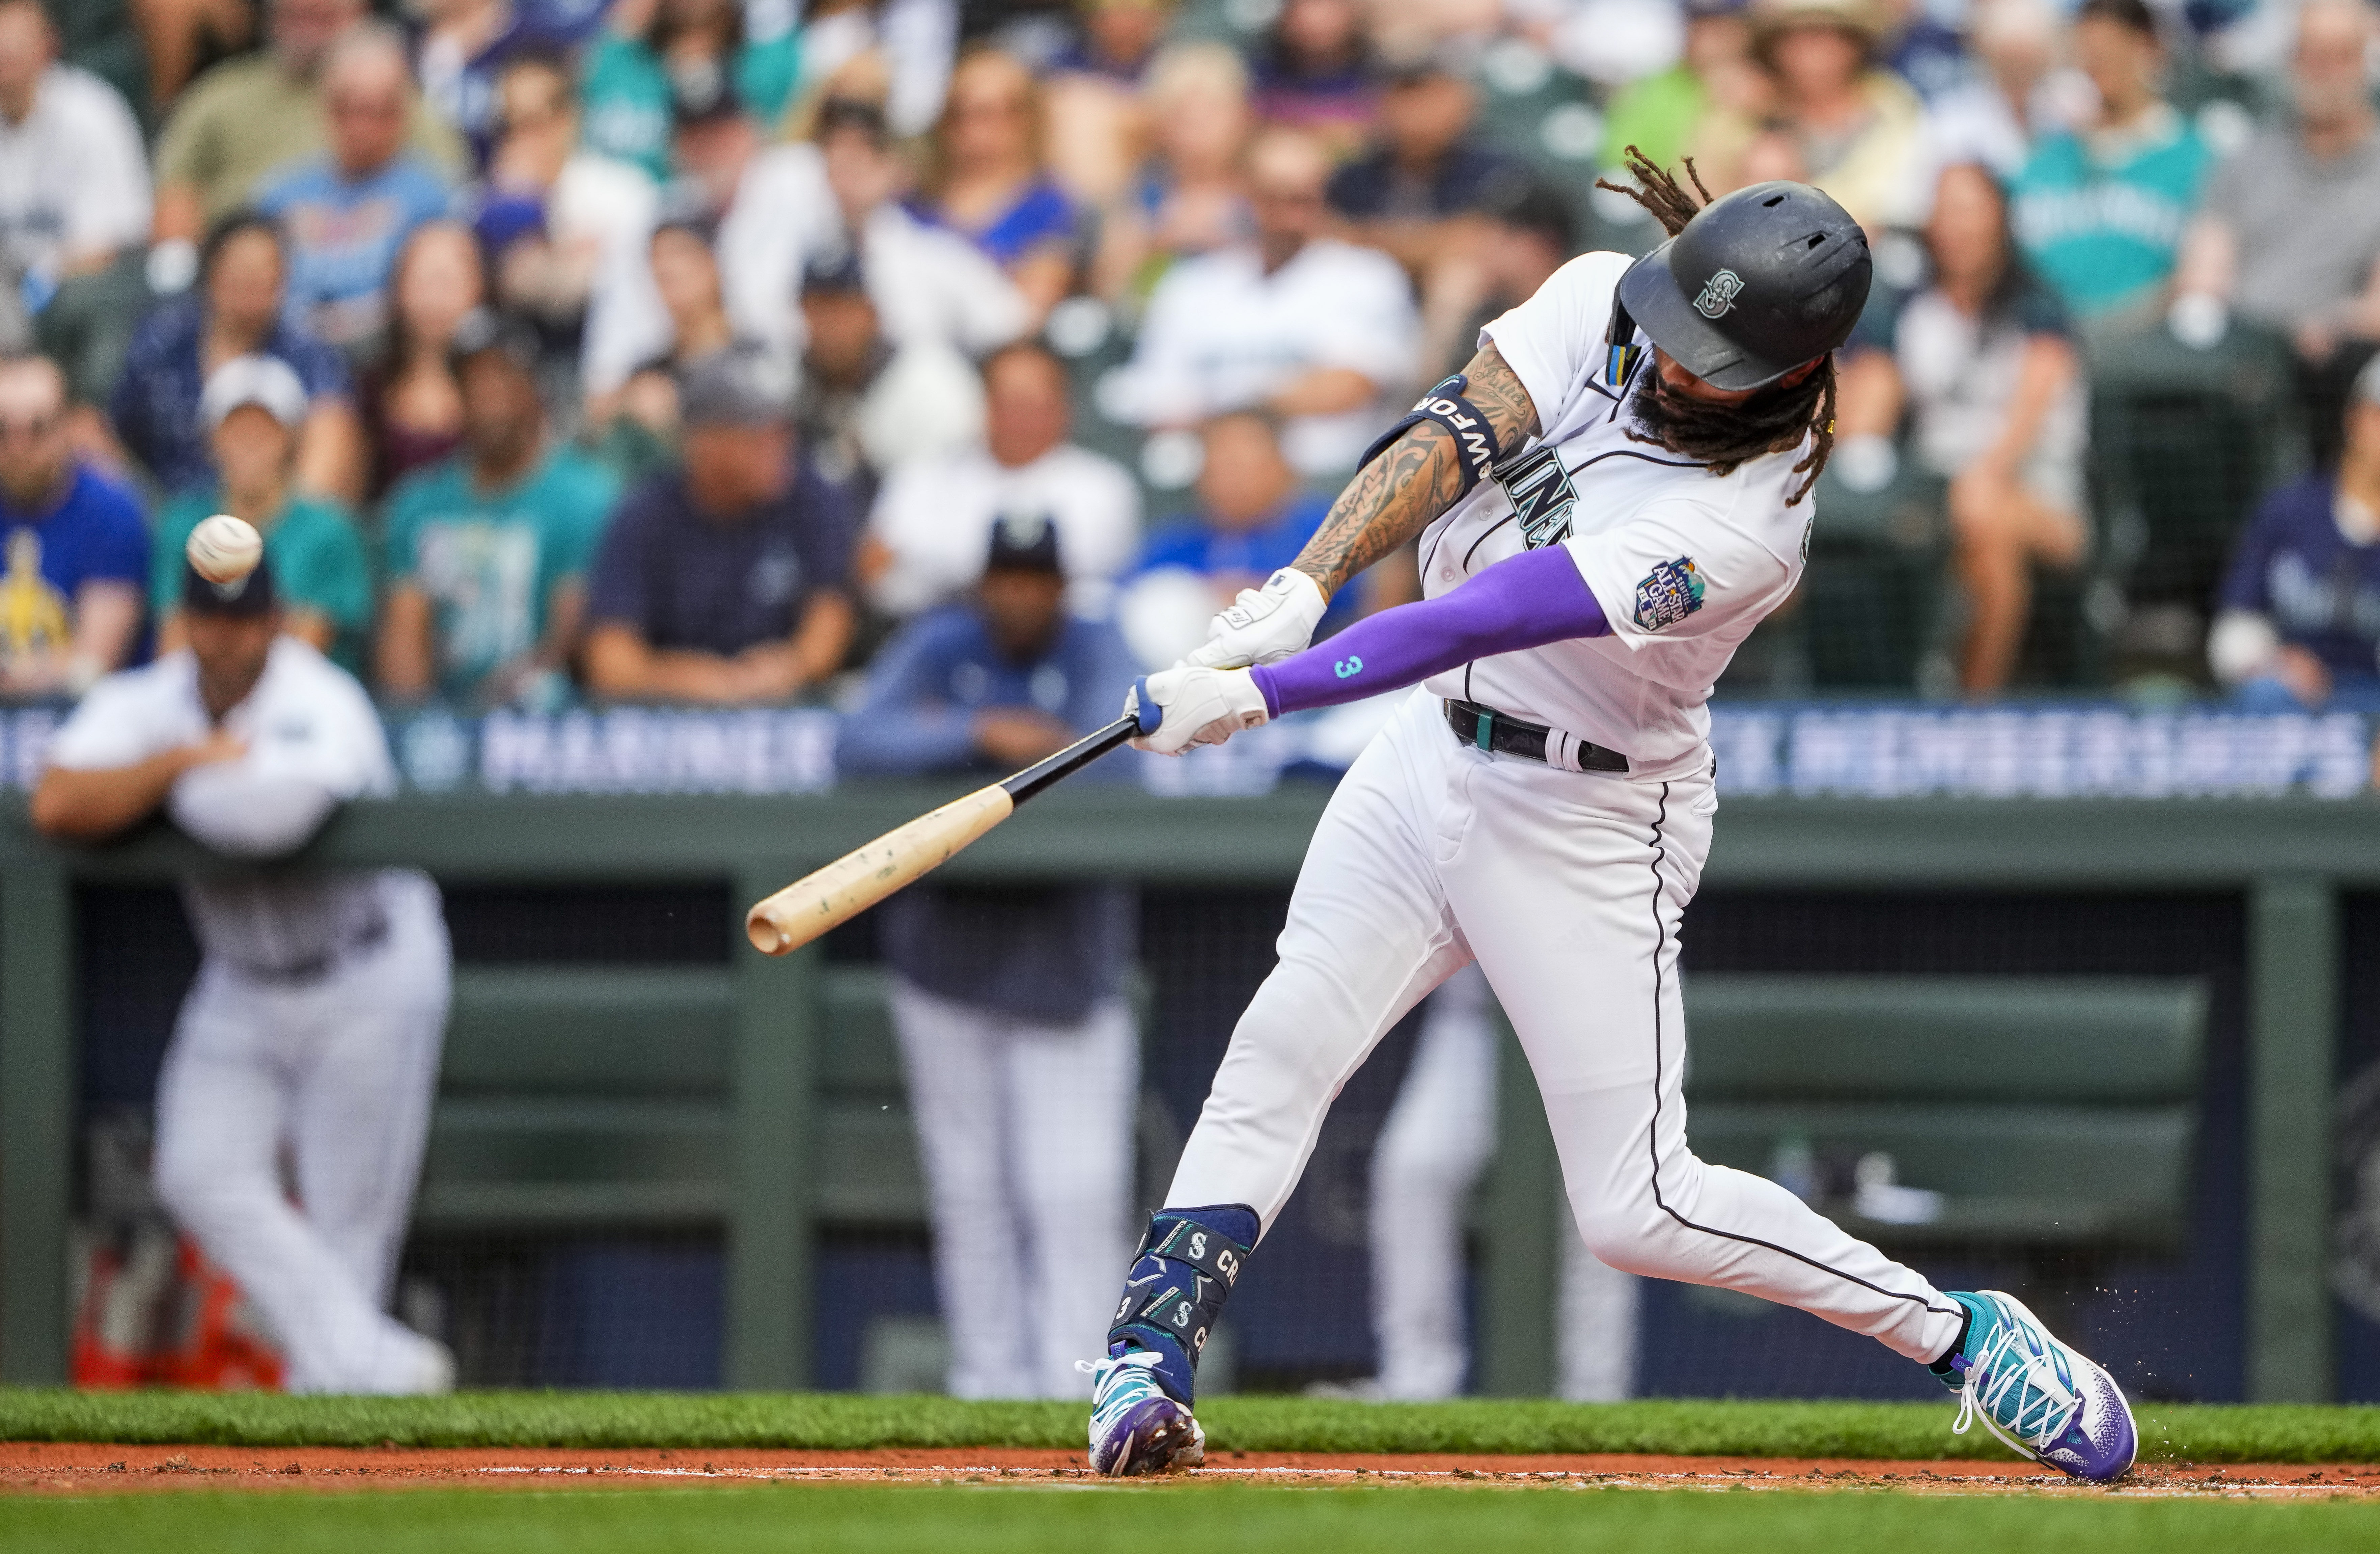 Seattle Mariners third baseman Eugenio Suarez jogs the bases after hitting  a home run against the Washington Nationals in a baseball game Monday, June  26, 2023, in Seattle. The Mariners won 8-4. (